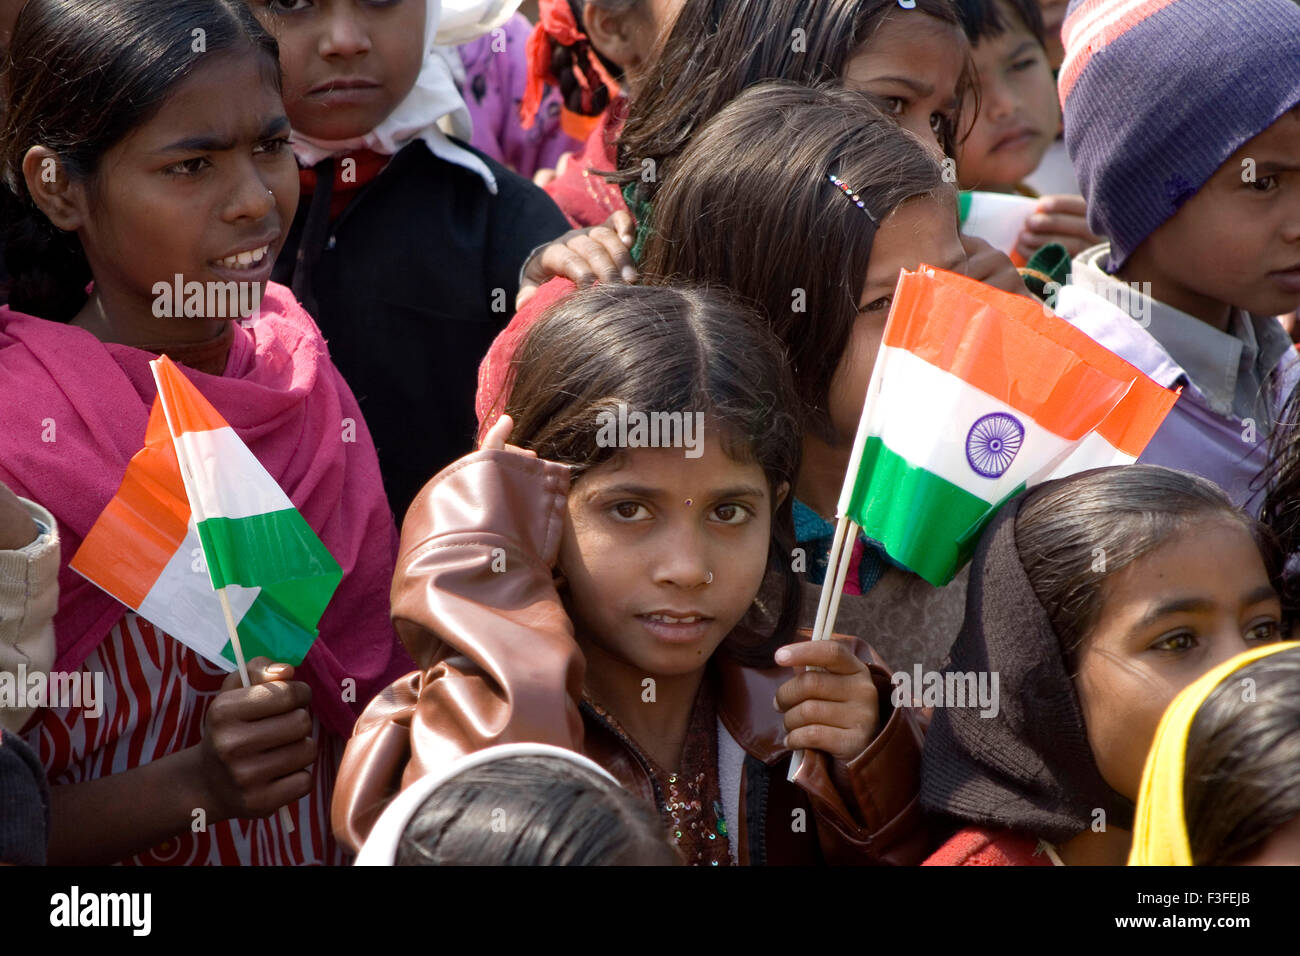 Muslim children's procession against child labour with Indian flag on ...